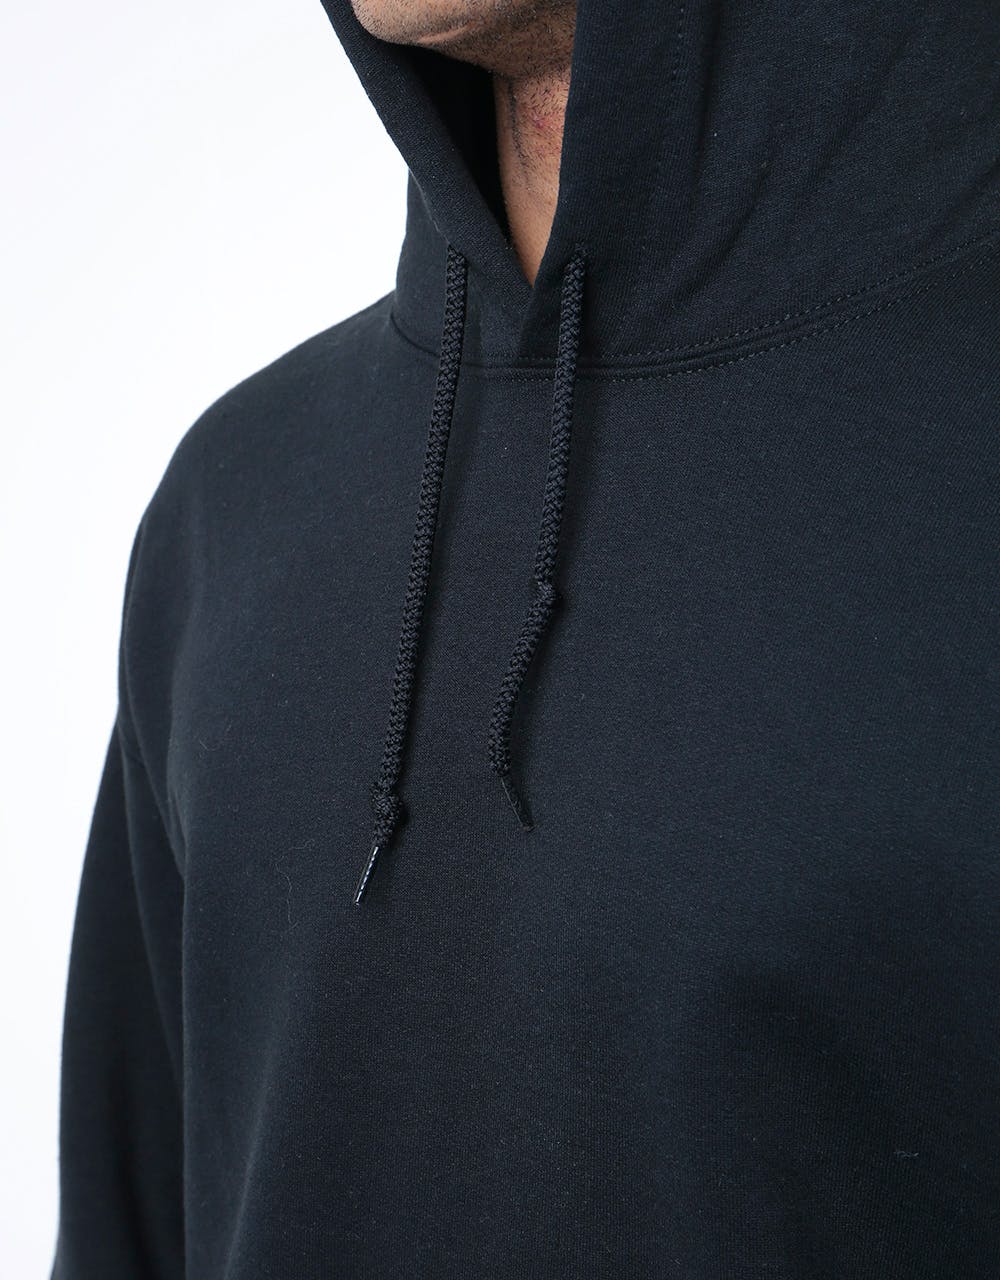 Madness Great Goat Pullover Hoodie - Black